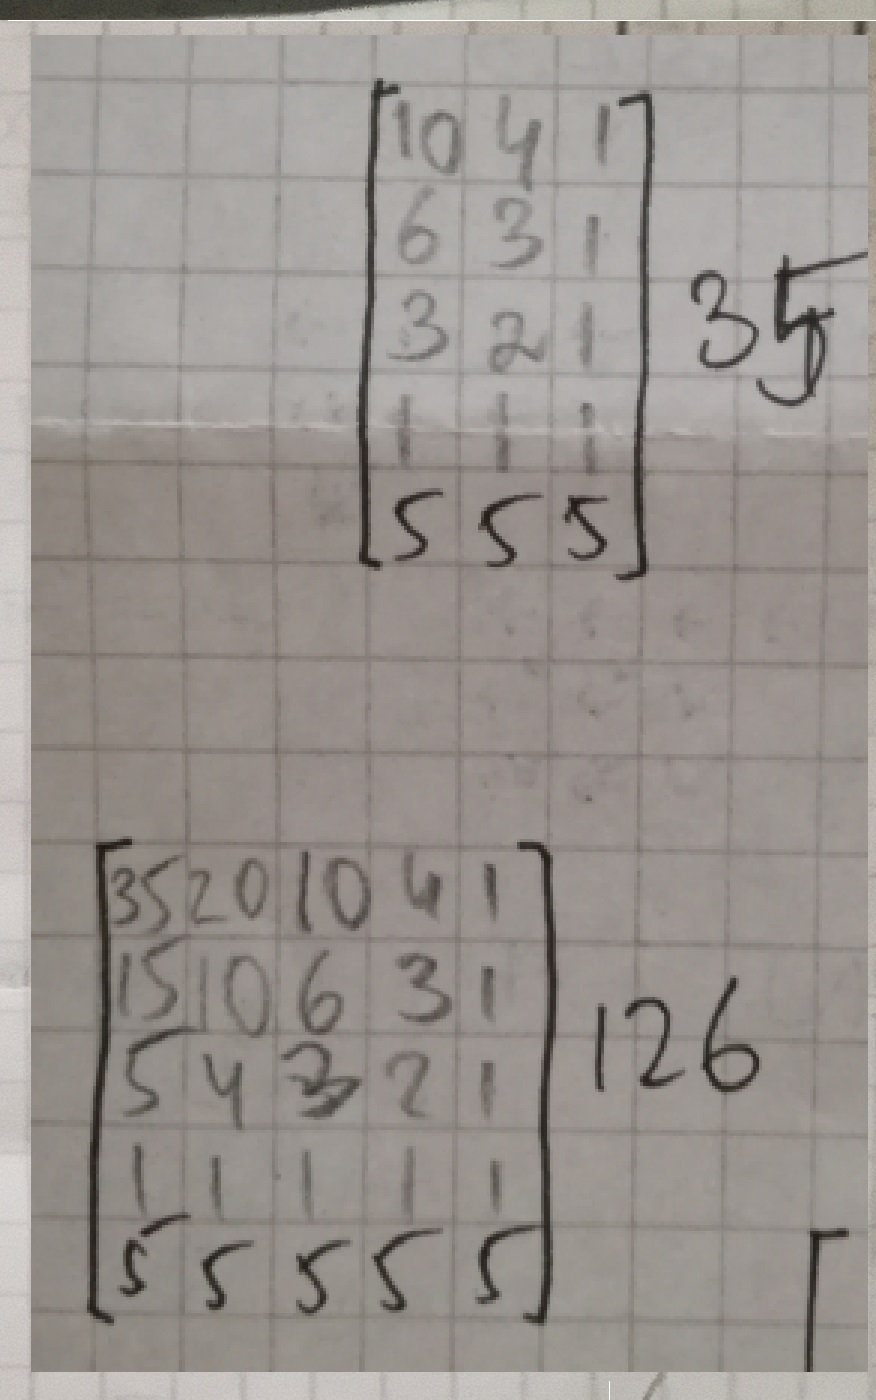 n=3, r=3 combinations with repetition